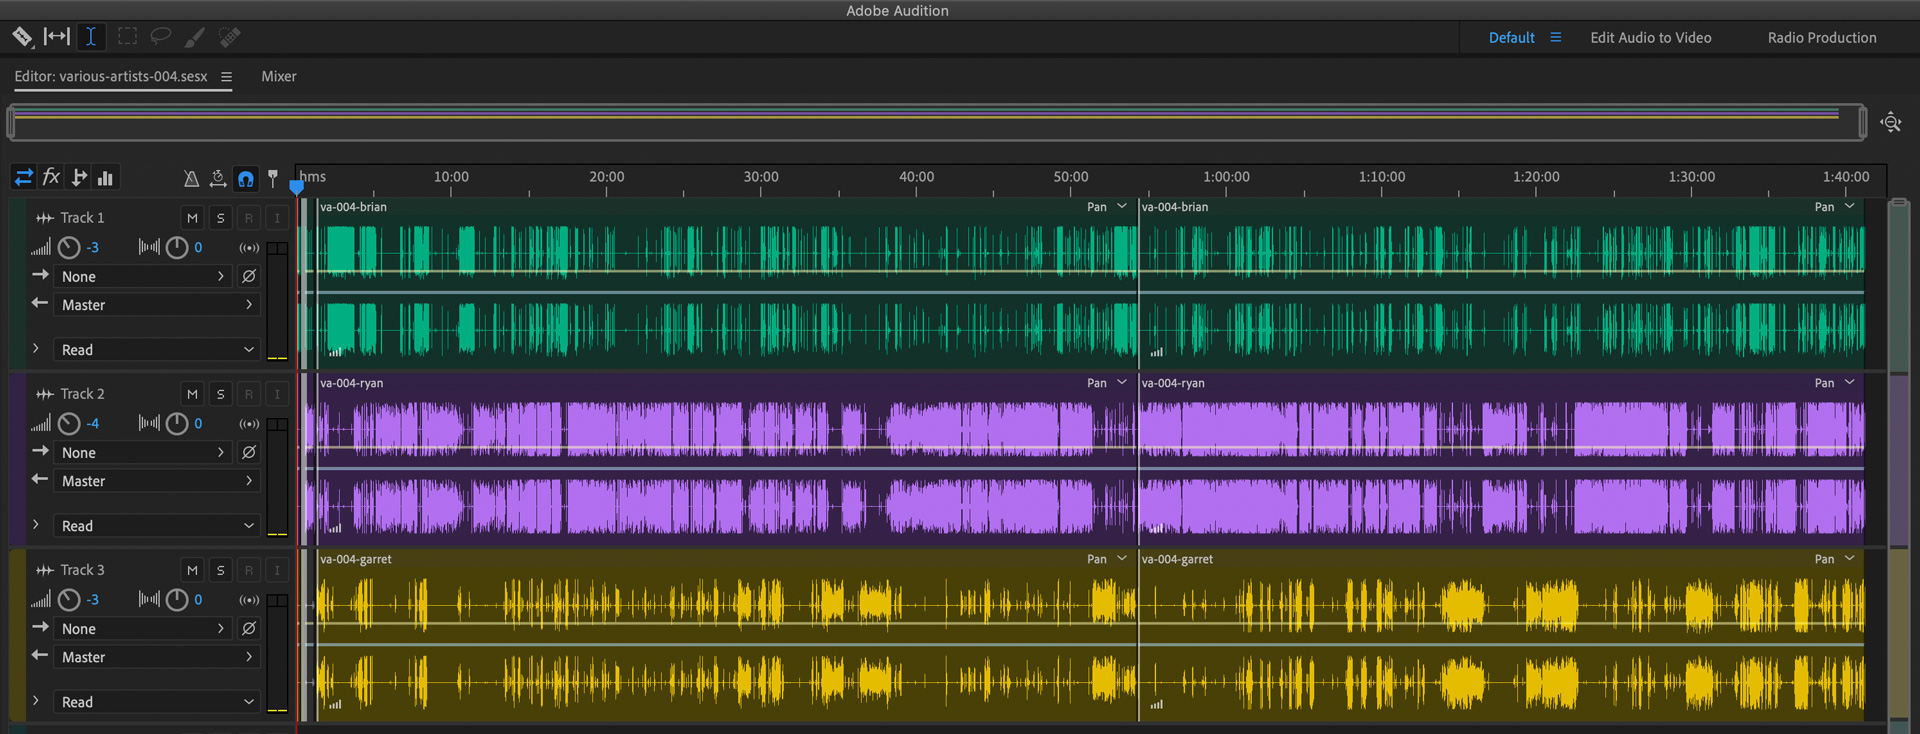 Adobe Audition is a powerful app for editing podcasts.